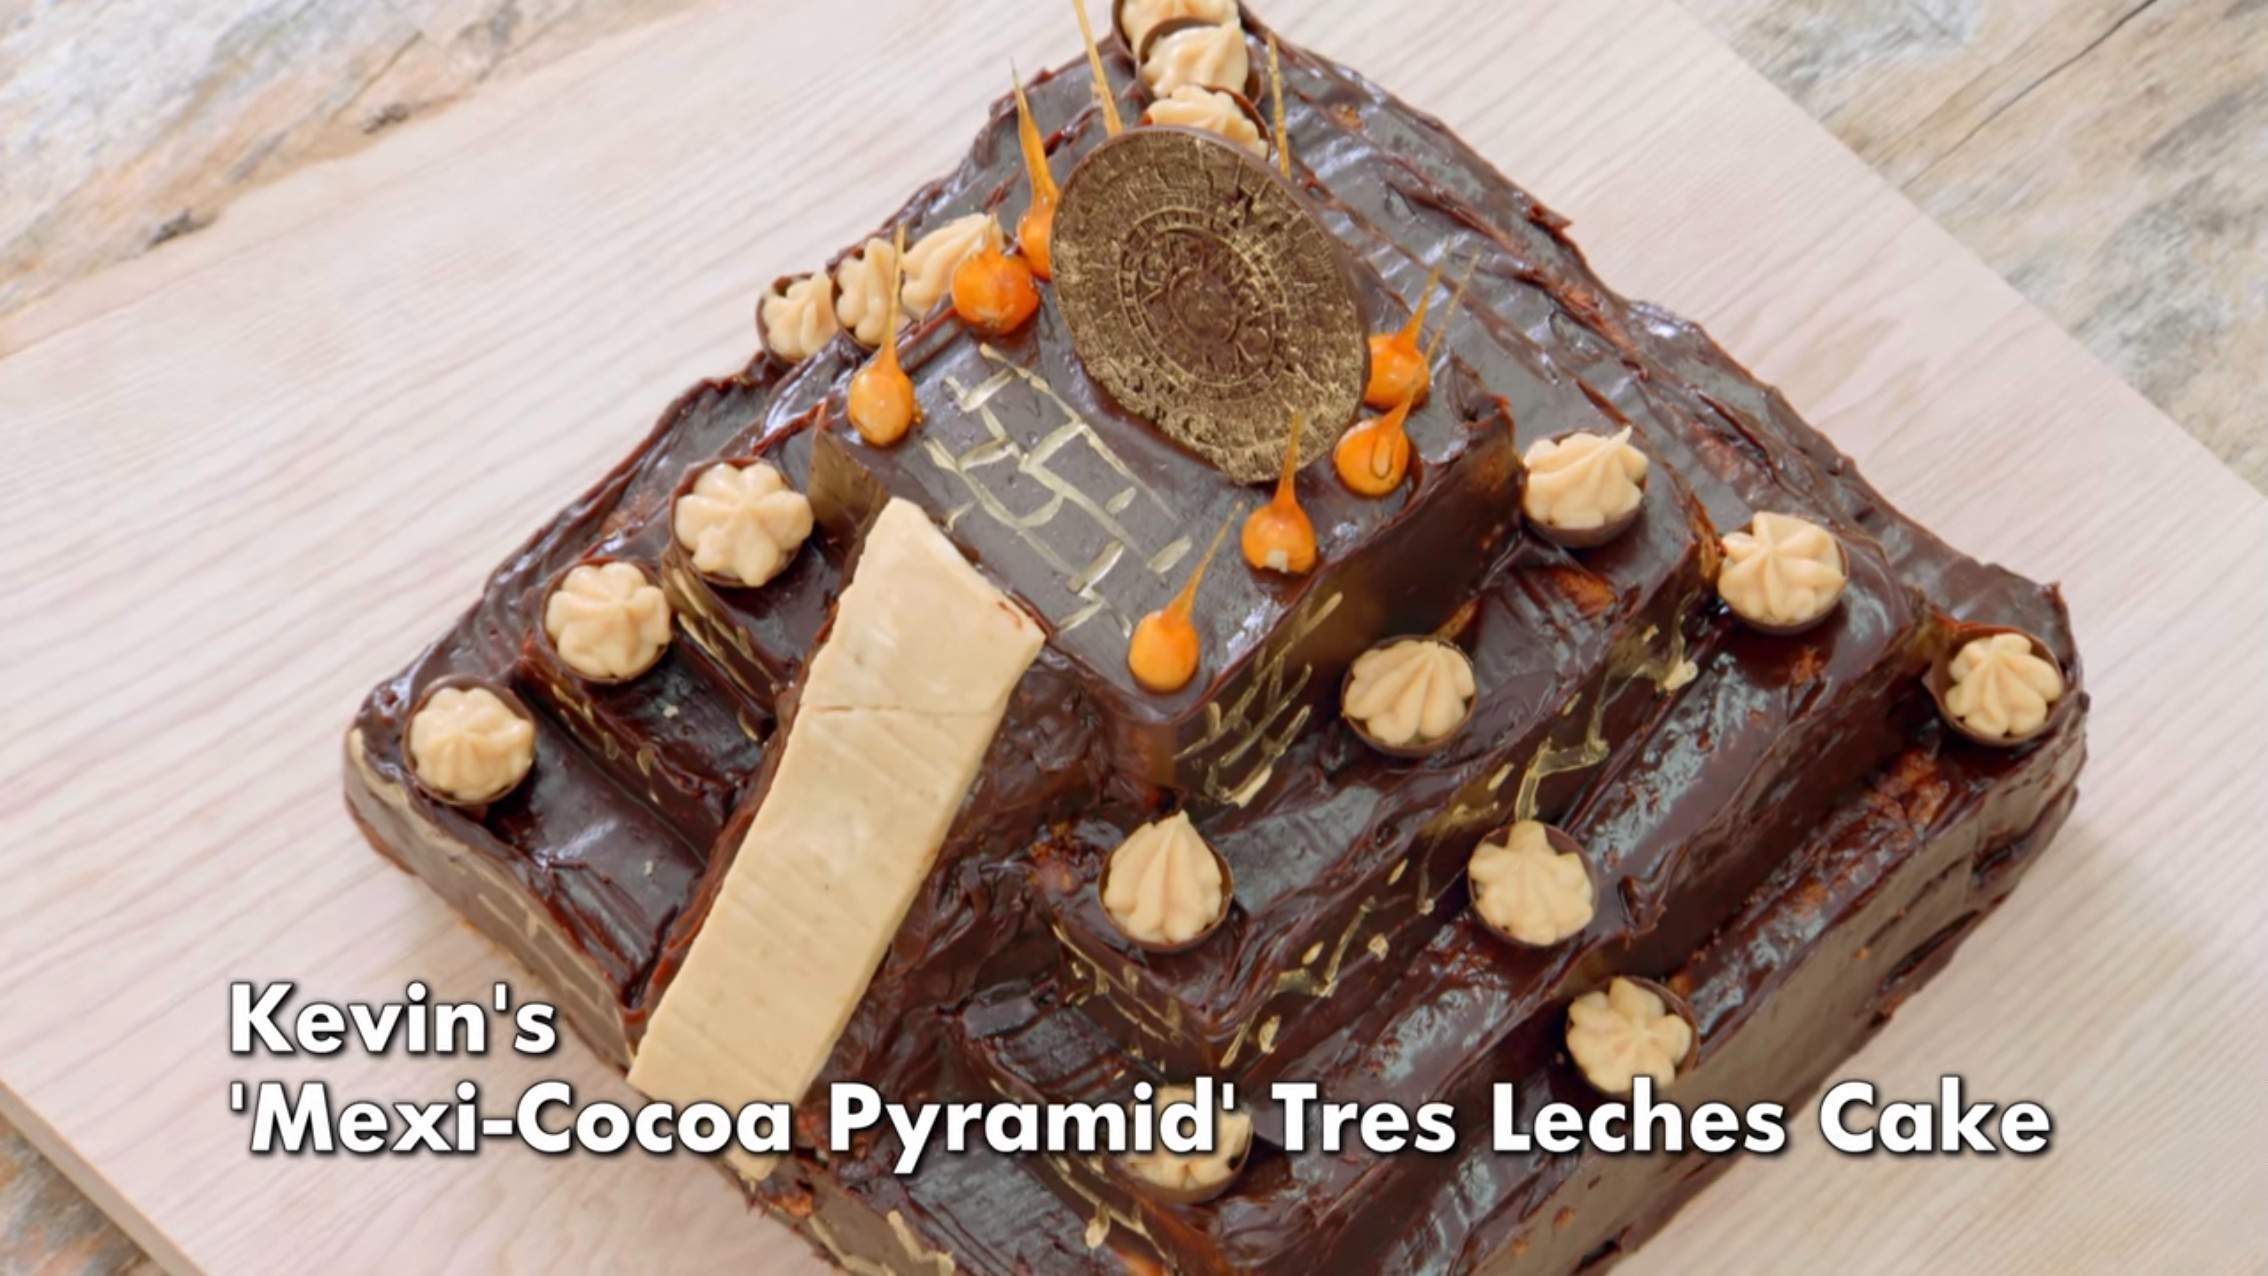 Picture Shows: The Great British Baking Show Collection 10, Mexican Week, Kevin's ‘Meci-Cocoa Pyramid’ Tres Leches Showstopper Cake